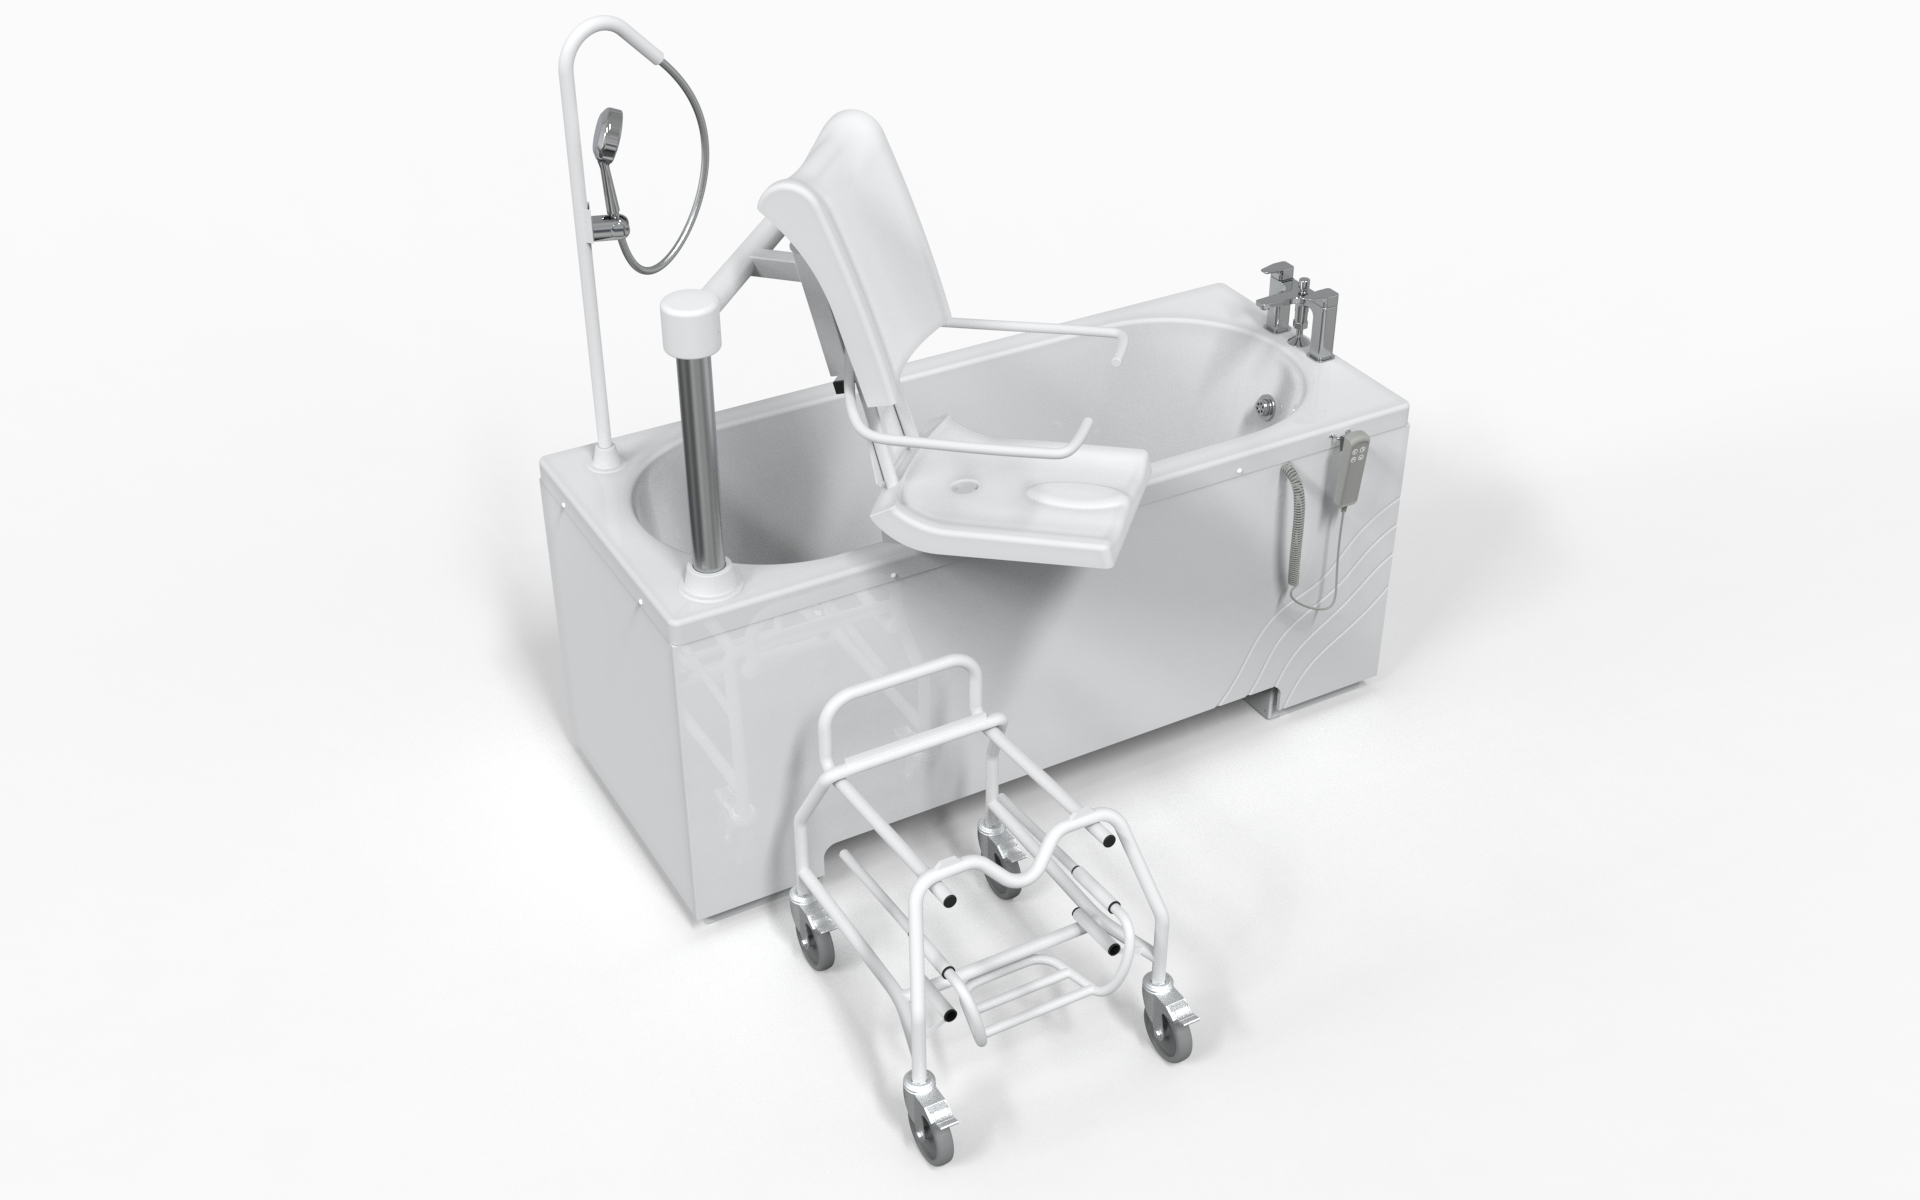 The Detachable Seat and Transporter System Protec Baths